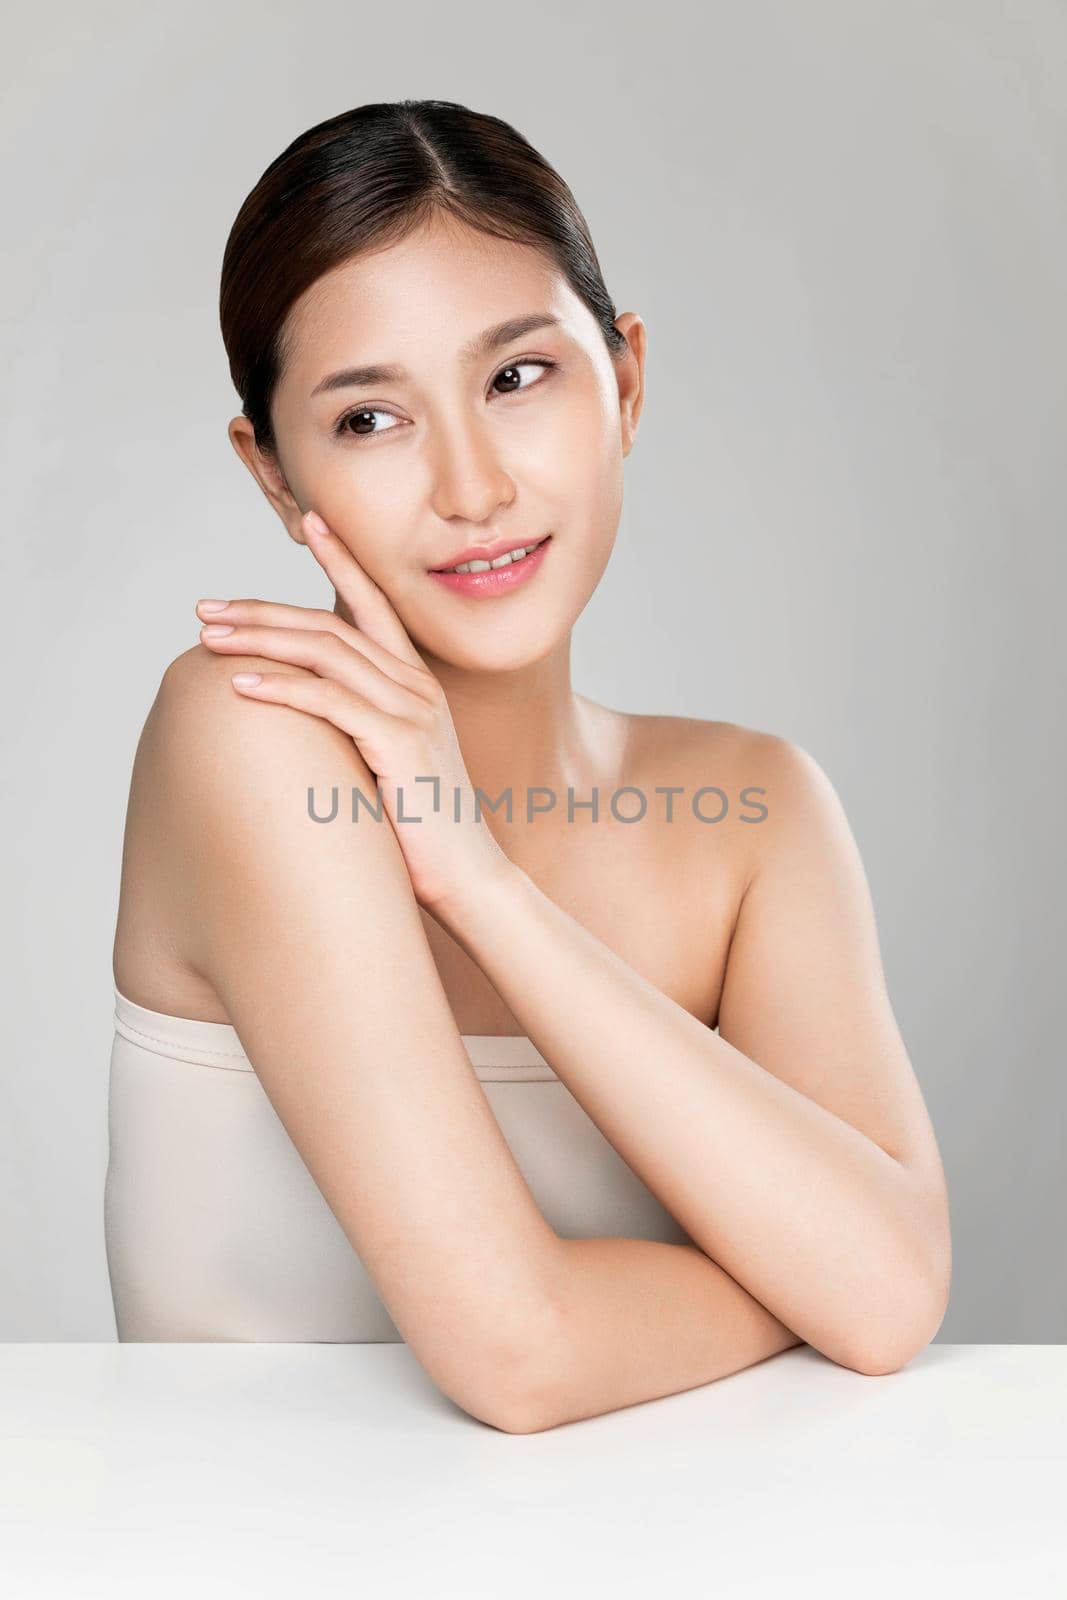 Portrait of ardent young woman posing beauty gesture with clean fresh skin. by biancoblue